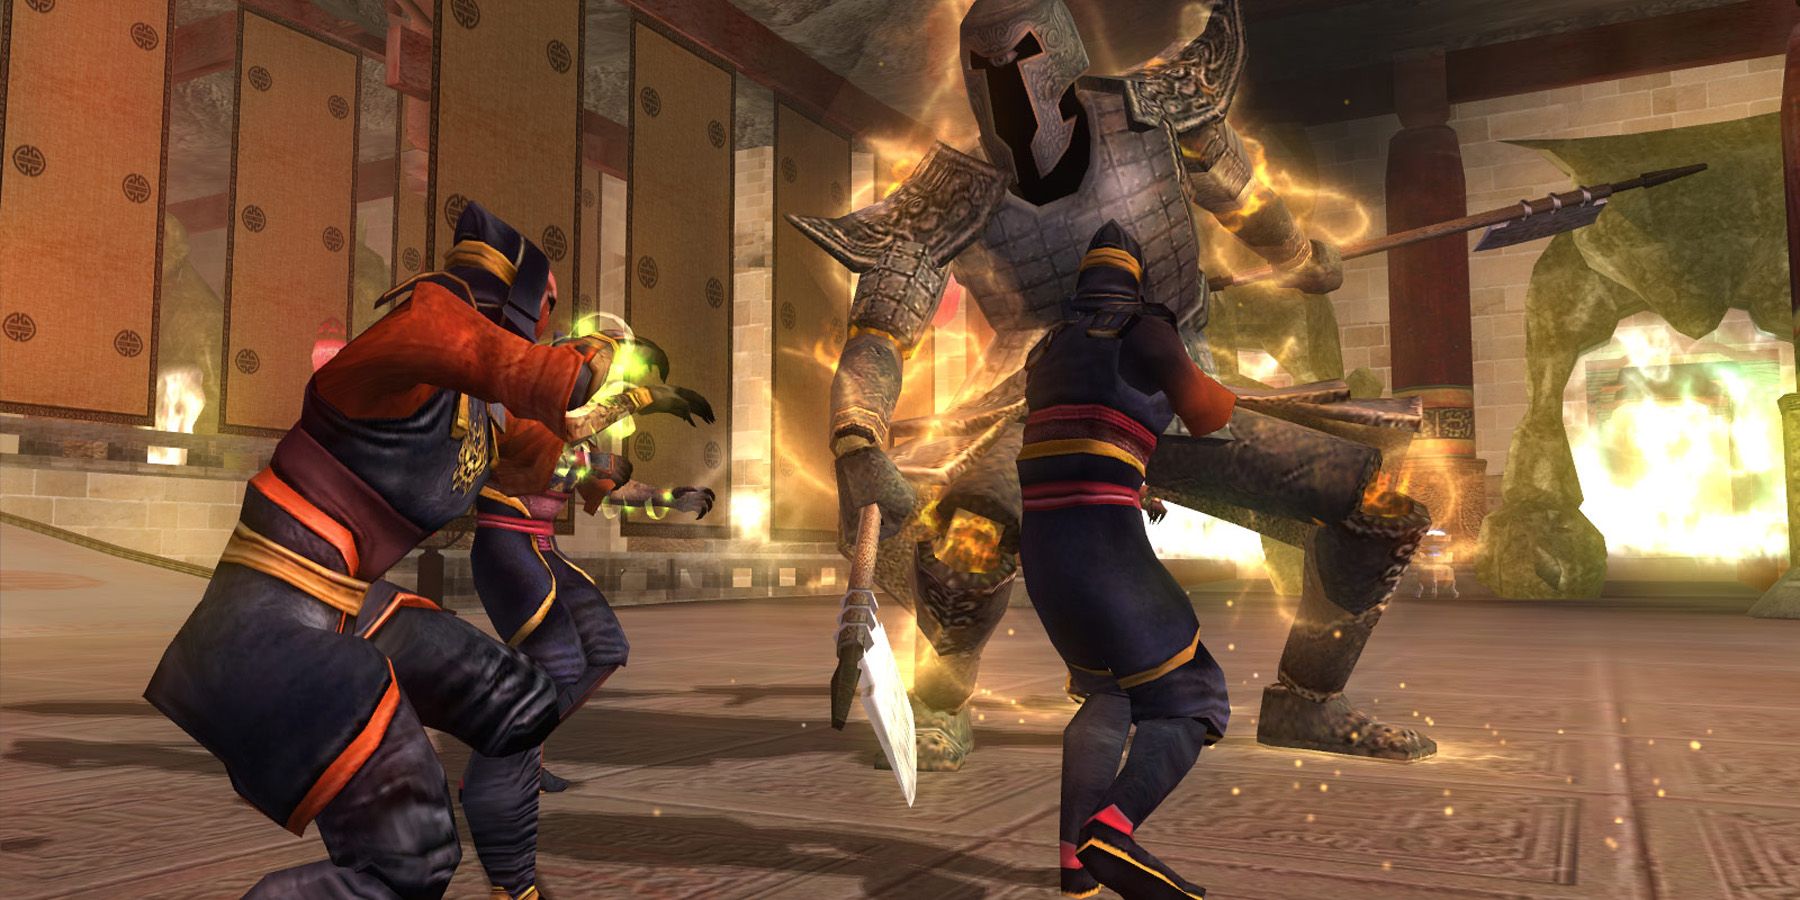 A player being attacked in Jade Empire 